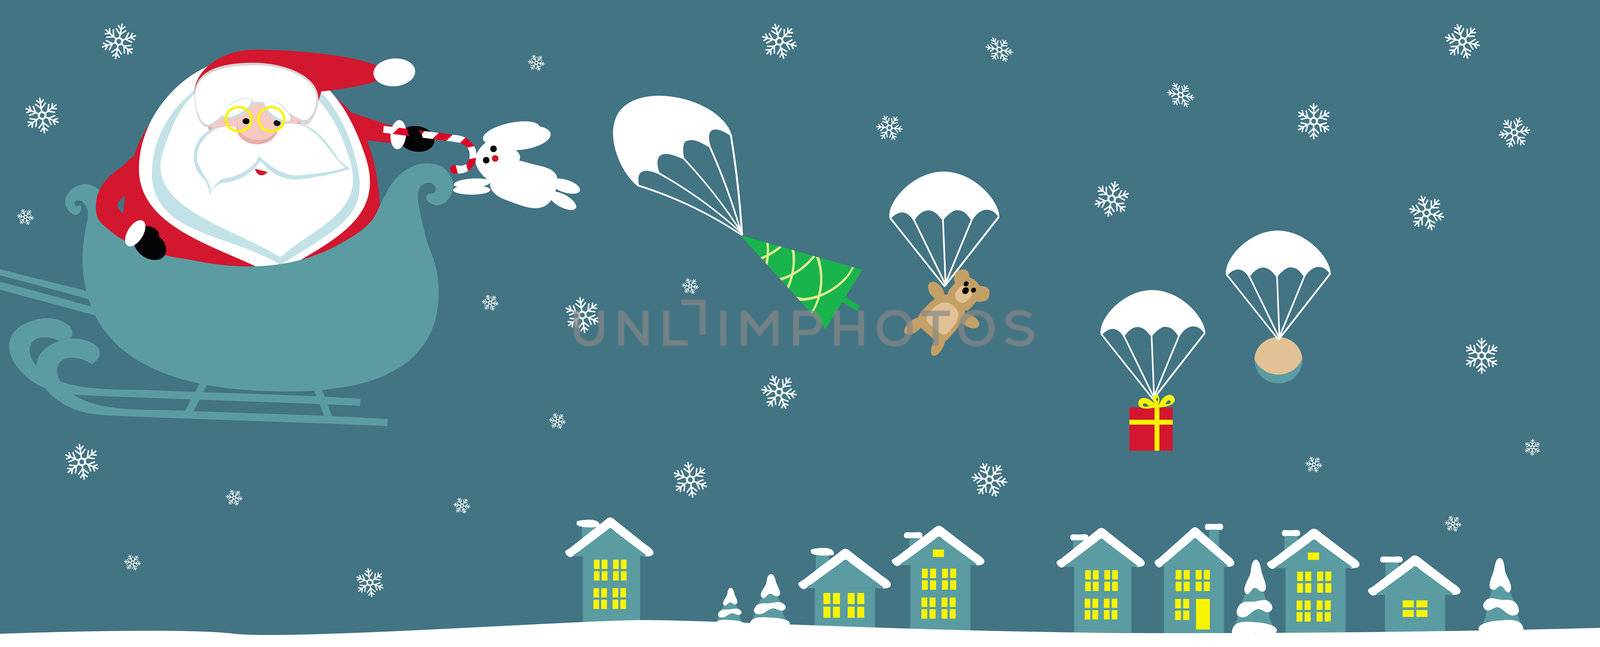 Cartoon Santa with bell in sleight dropping presents with parachutes. Vector